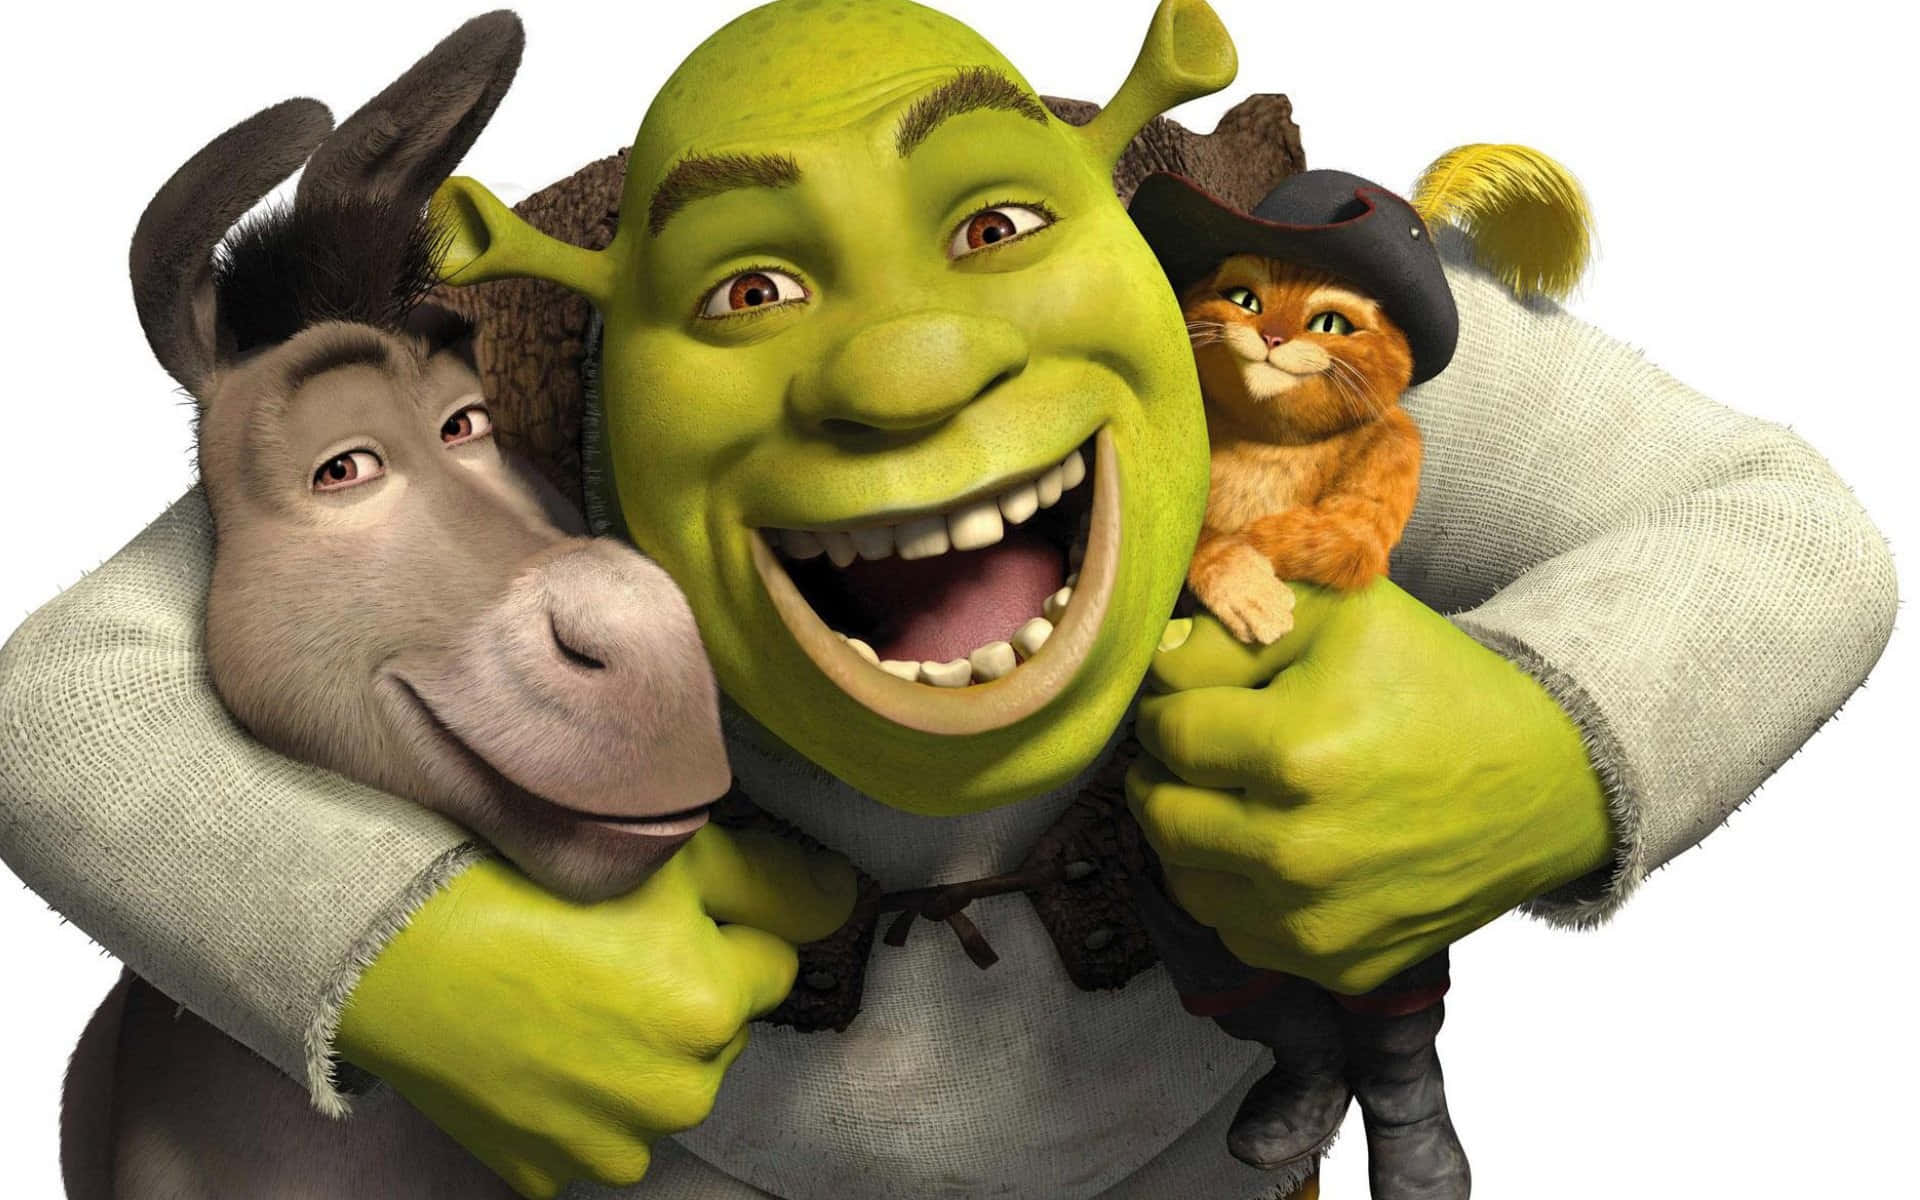 The iconic Shrek brings laughter and joy to millions of viewers worldwide